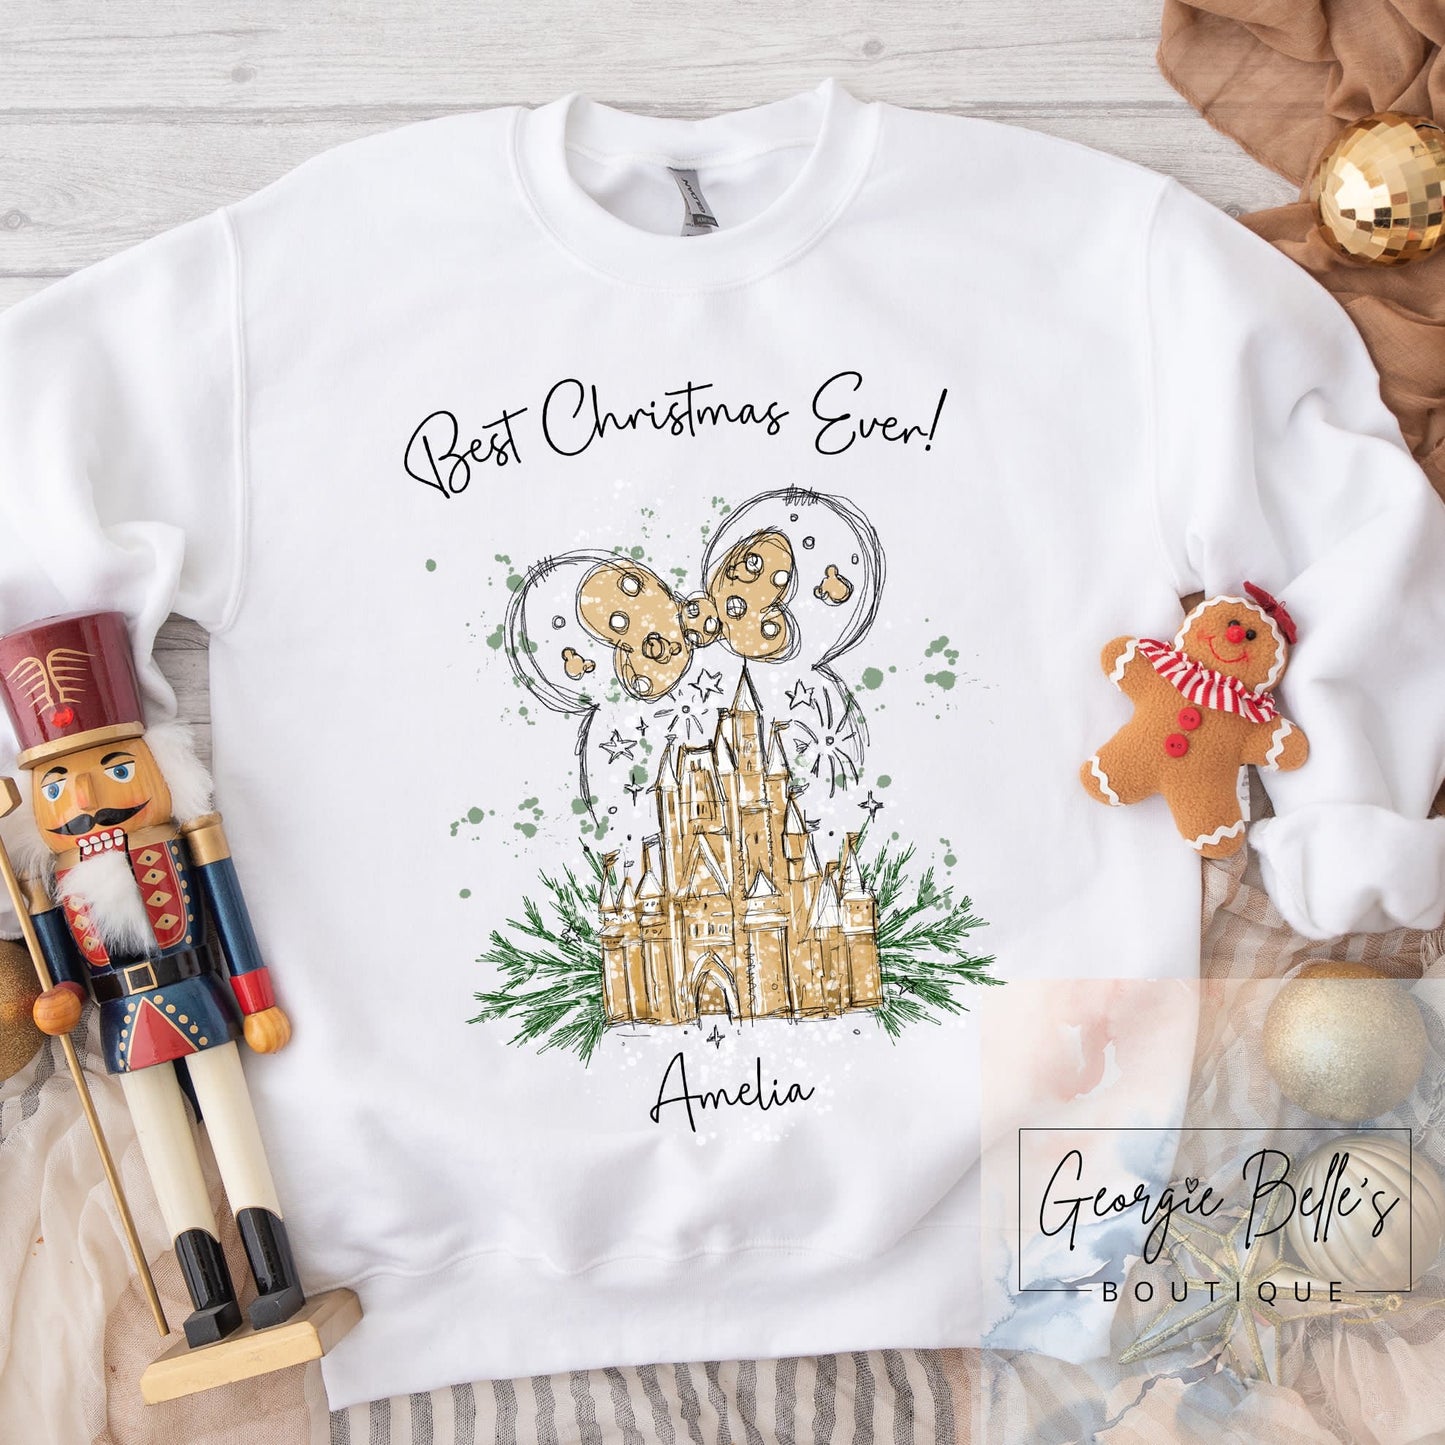 Personalised Christmas Jumper - Nude/Gold Minnie Inspired Disney Design